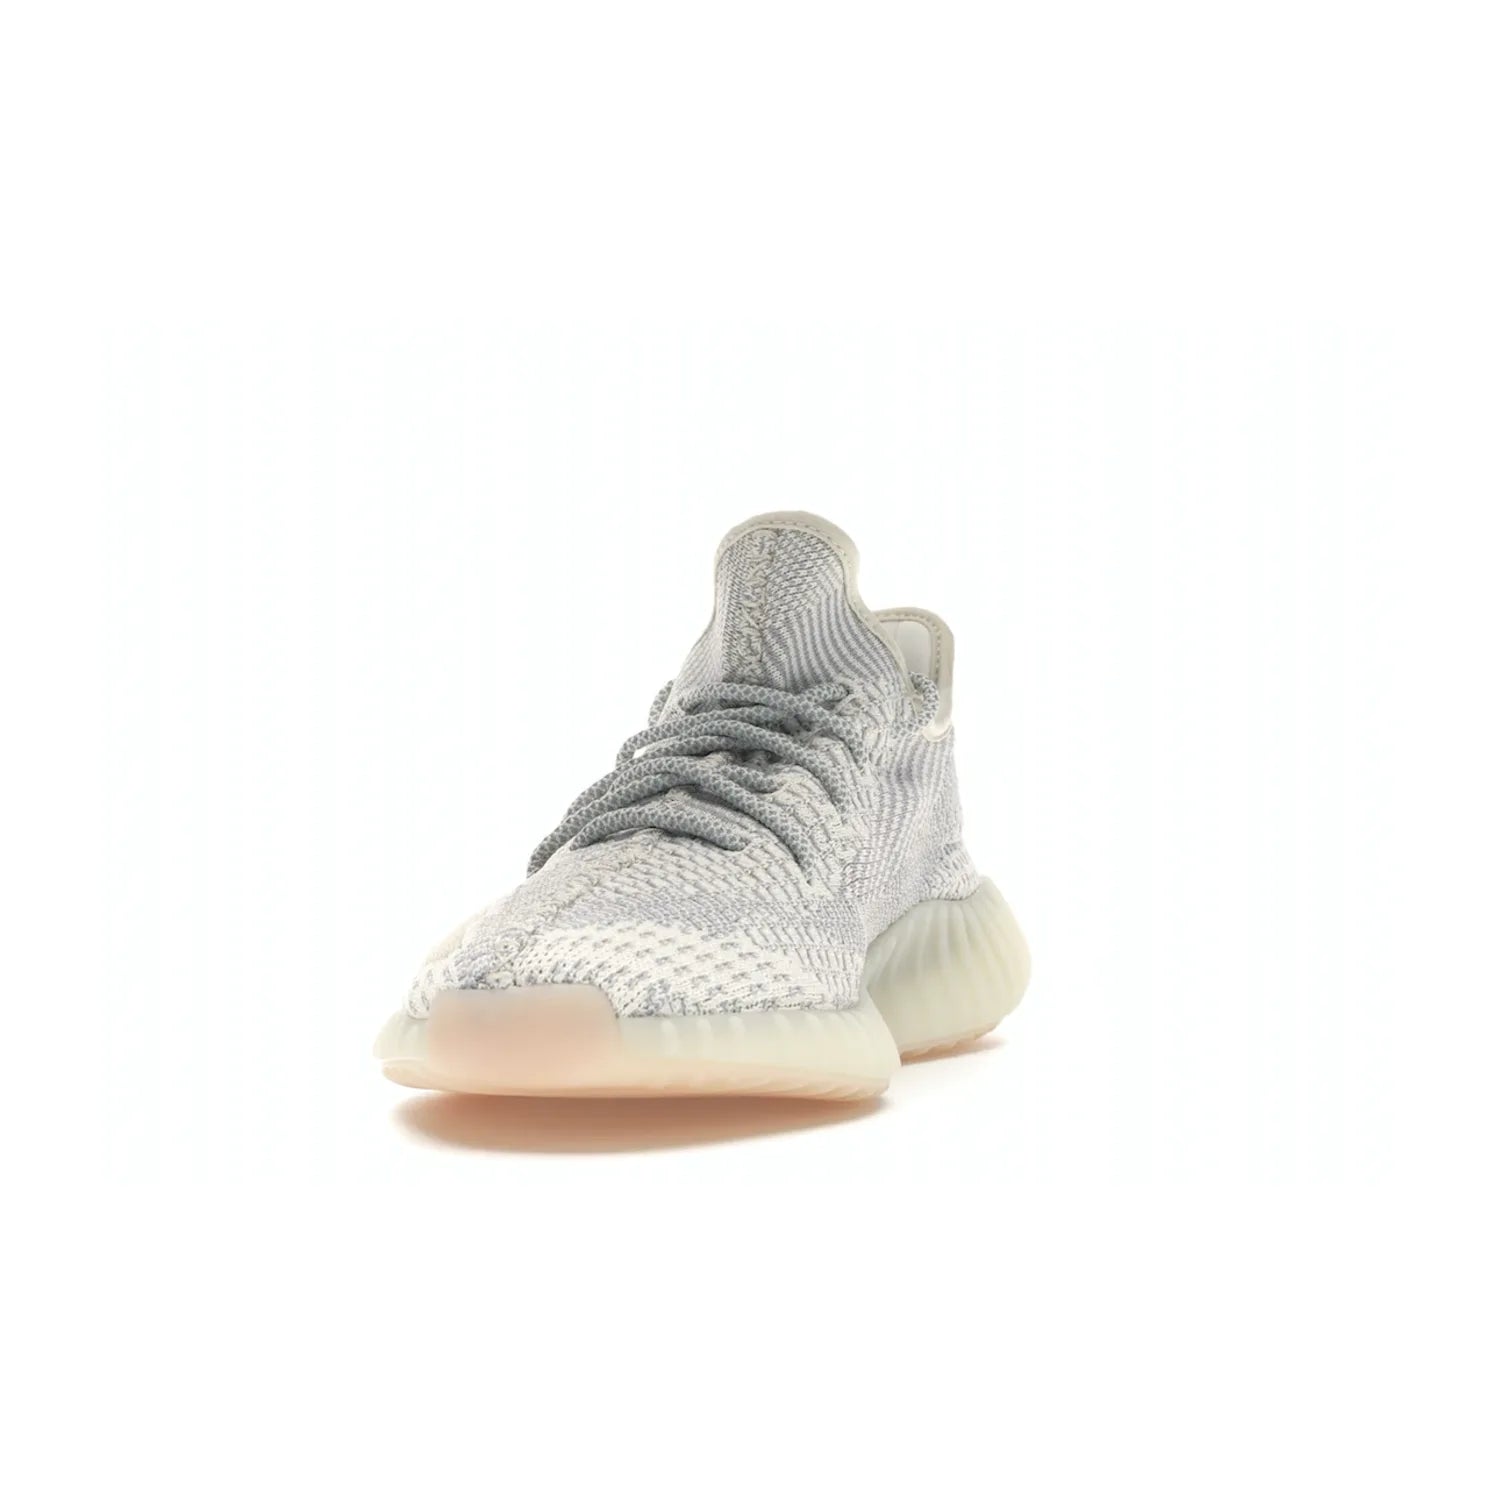 adidas Yeezy Boost 350 V2 Lundmark (Non Reflective) - Image 12 - Only at www.BallersClubKickz.com - Shop the exclusive adidas Yeezy Boost 350 V2 Lundmark with a subtle summer color, mesh upper, white-to-cream transitional midsole, light tan outsole, and pink middle stripe. Comfort and style come together in this perfect summer 350 V2. Released on July 11, 2019.